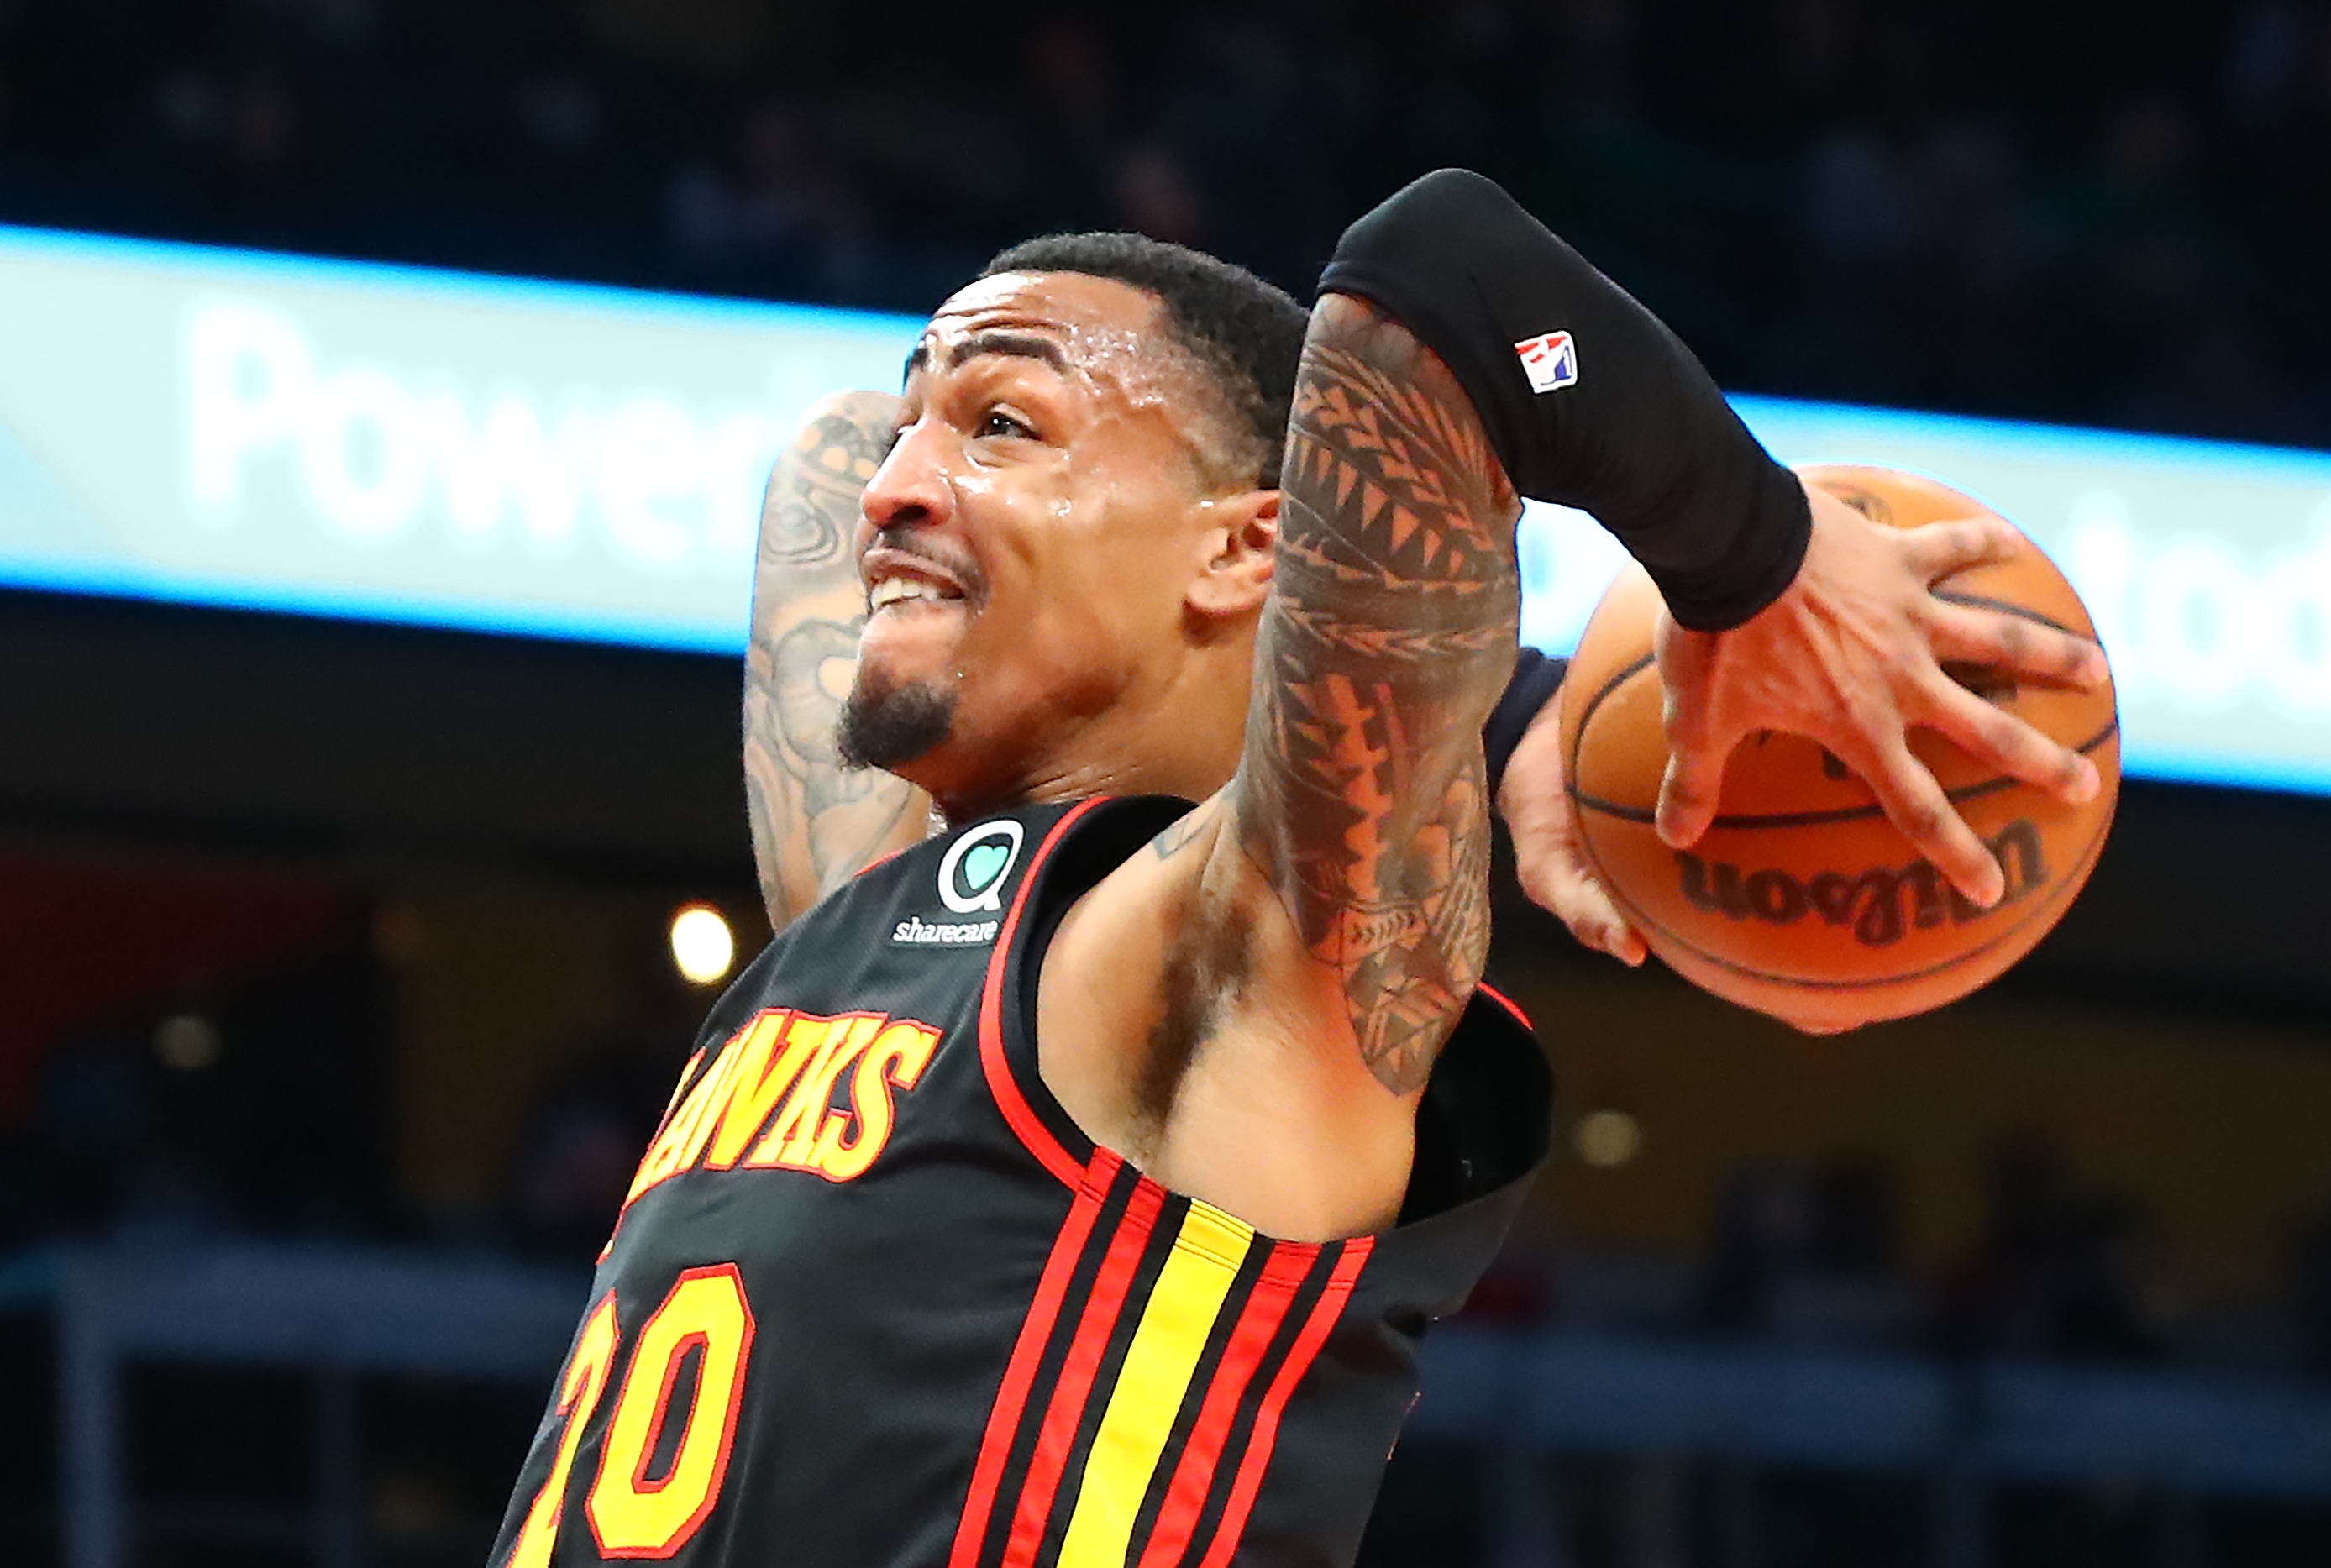 Atlanta Hawks forward John Collins jumps to the basket during the first period of an NBA basketball game to slam against the Indiana Pacers on Tuesday, February 8, 2022 in Atlanta.  Curtis Compton / Curtis.Compton@ajc.com